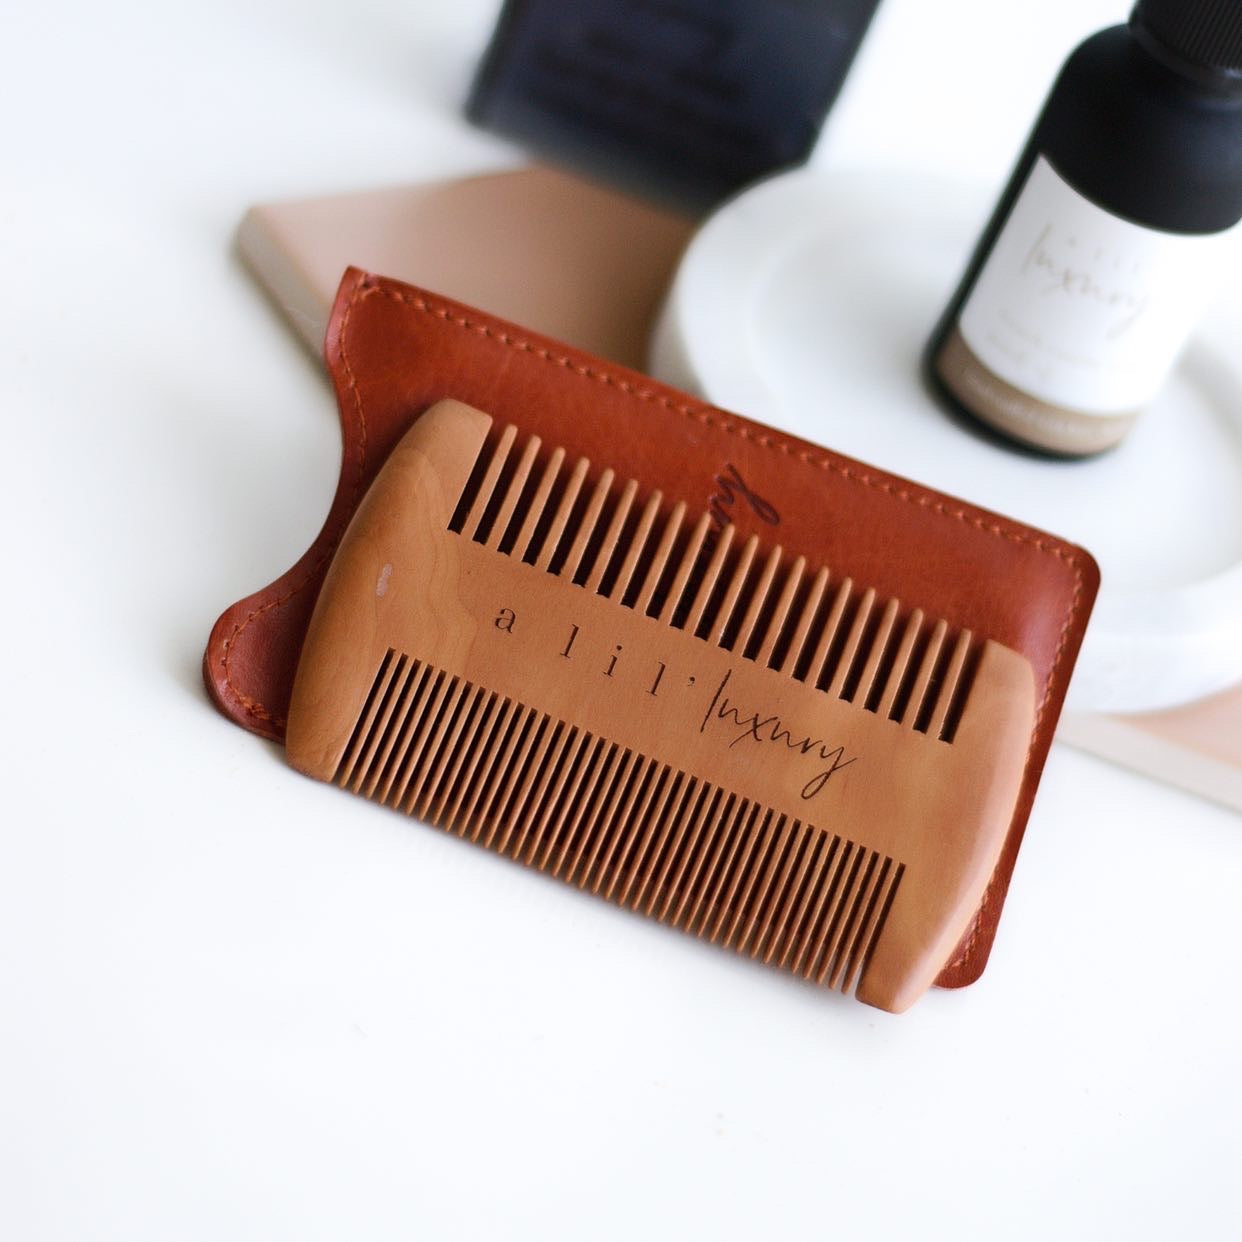 Luxe Beard Oil With Comb